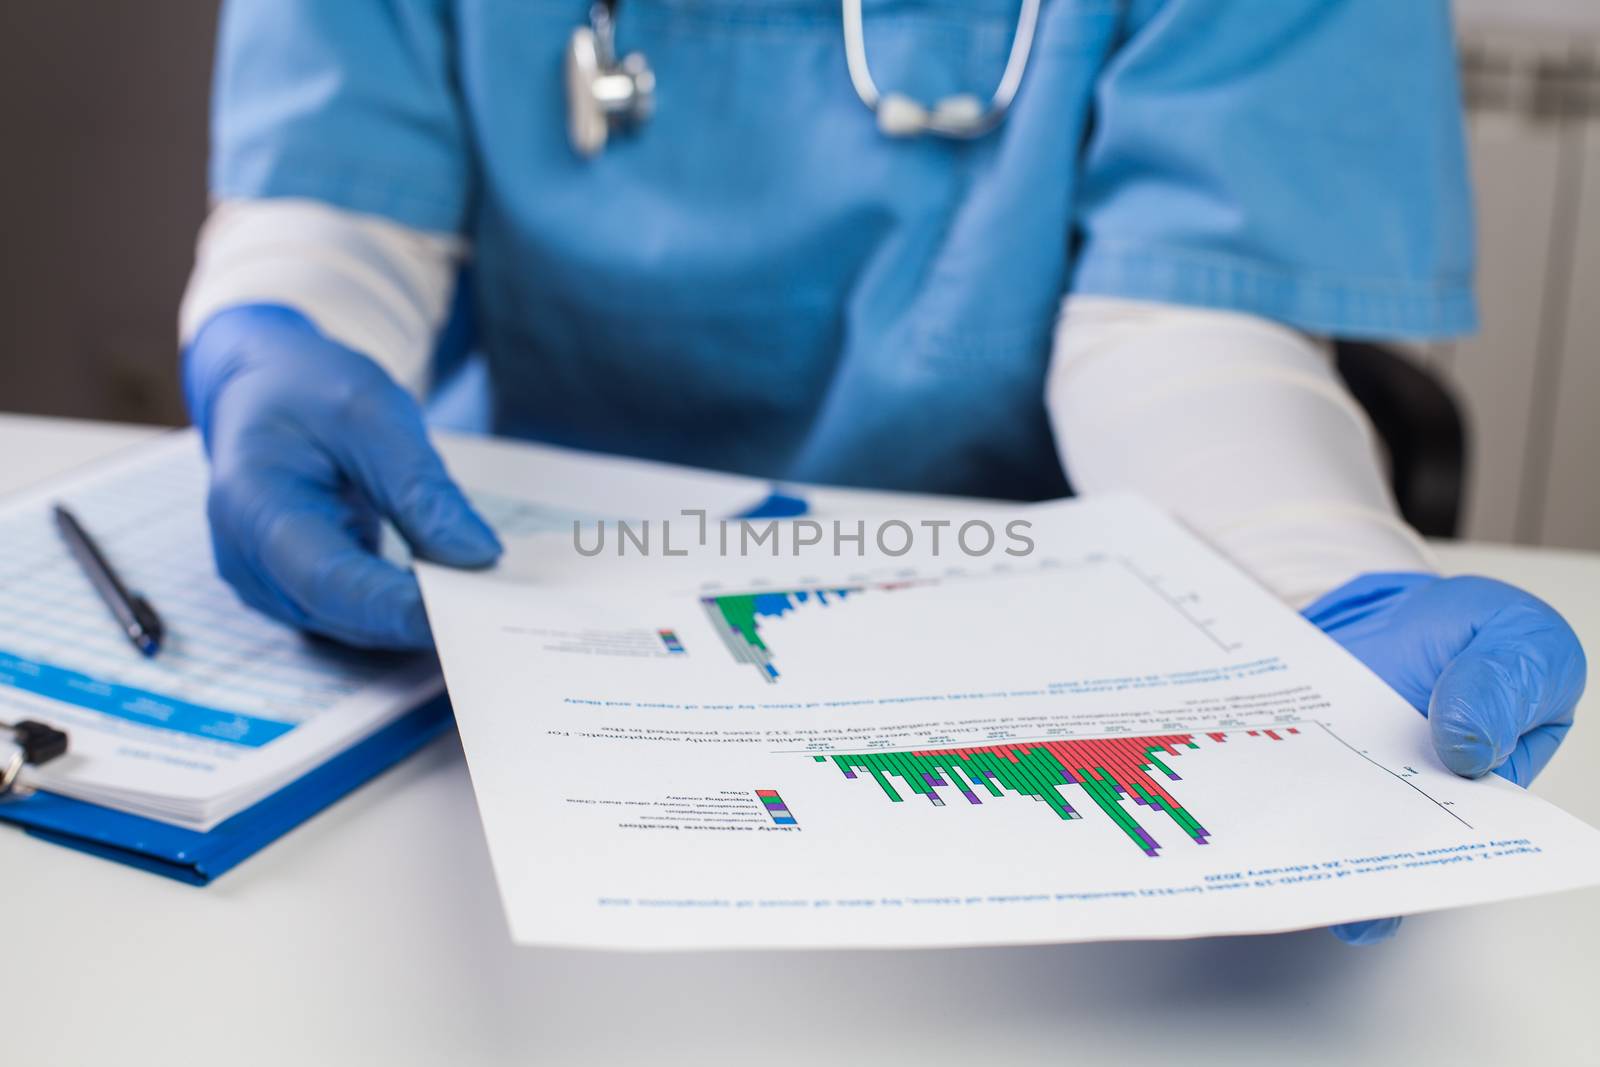 Doctor wearing protective gloves holding document chart,analyzing COVID-19 graph data,Coronavirus global pandemic outbreak crisis,stats showing number of infected patients,death toll,mortality rate